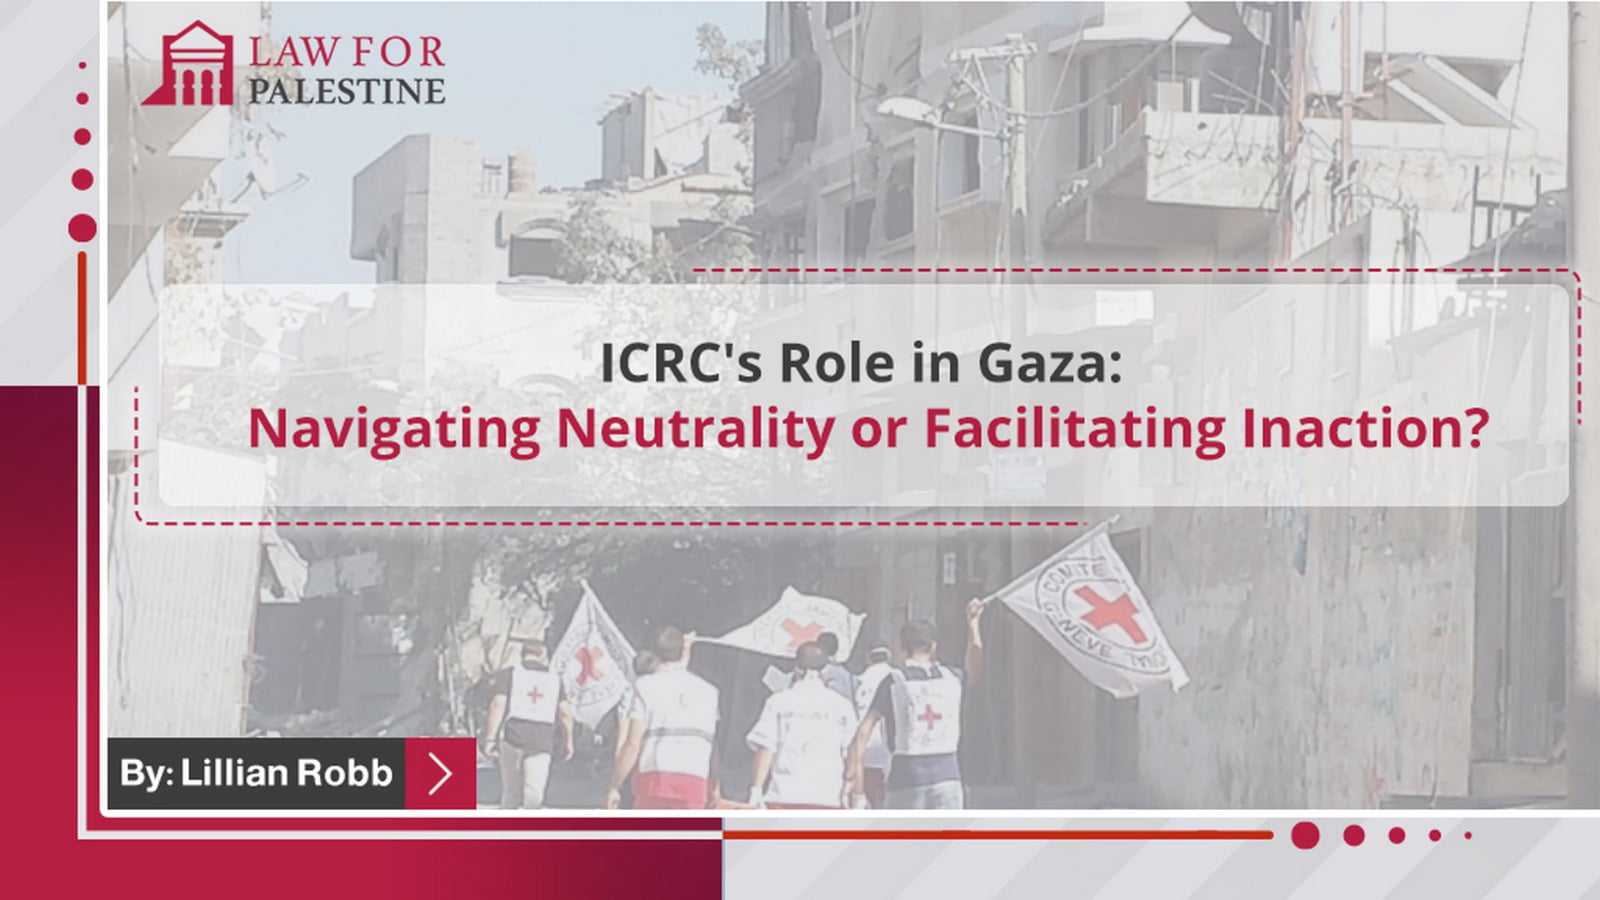 The ICRC failure in Gaza: Navigating Neutrality or Facilitating Inaction?